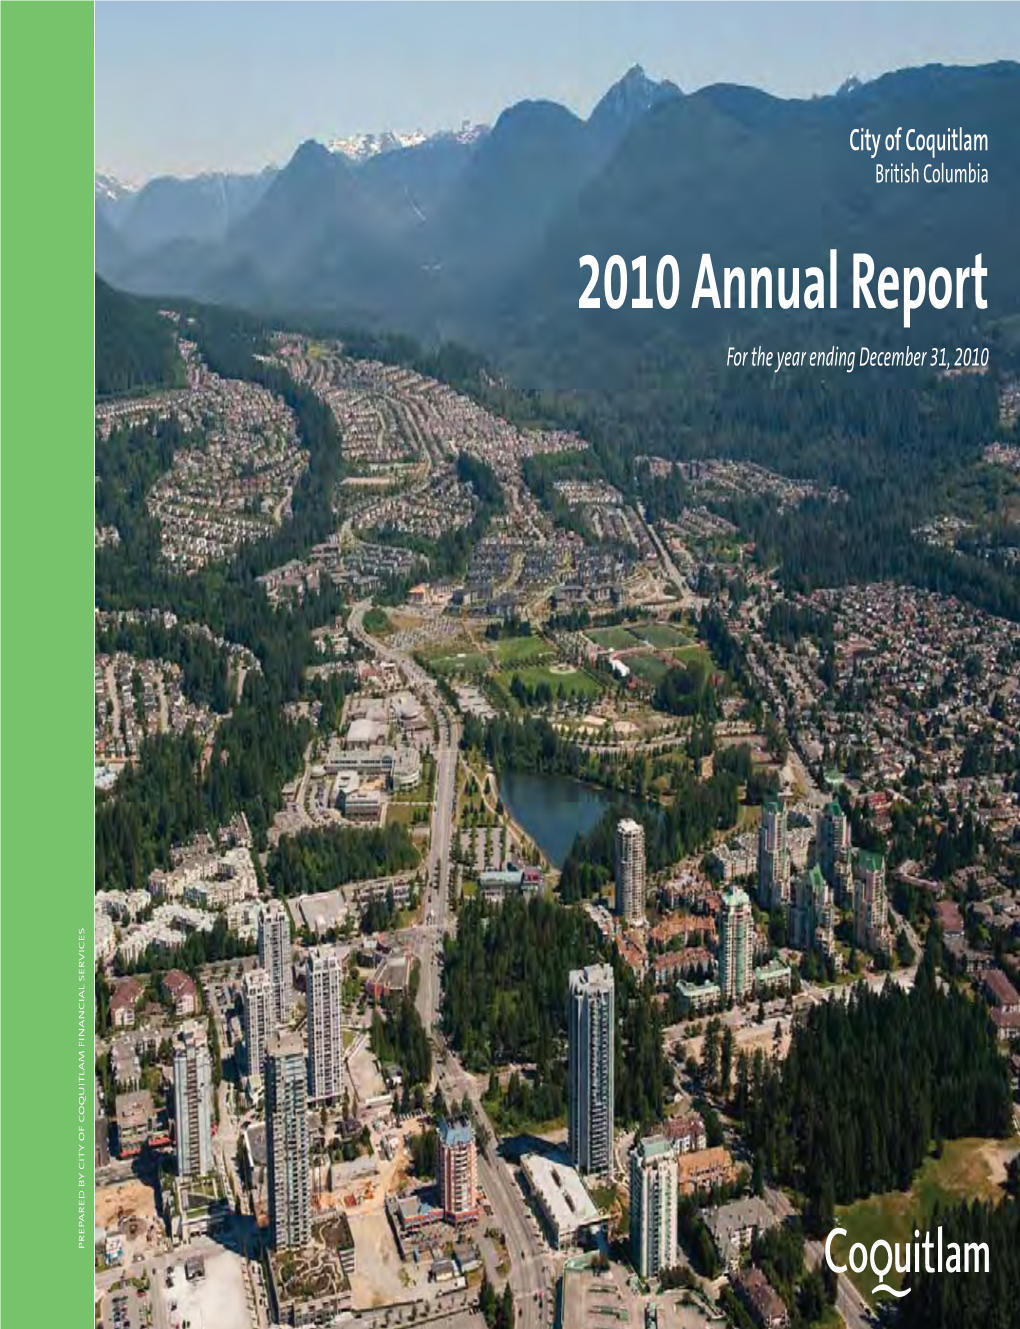 Coquitlam British Columbia 2010 Annual Report for the Year Ending December 31, 2010 PREPARED by CITY of COQUITLAM FINANCIAL CITY of COQUITLAM by SERVICES PREPARED